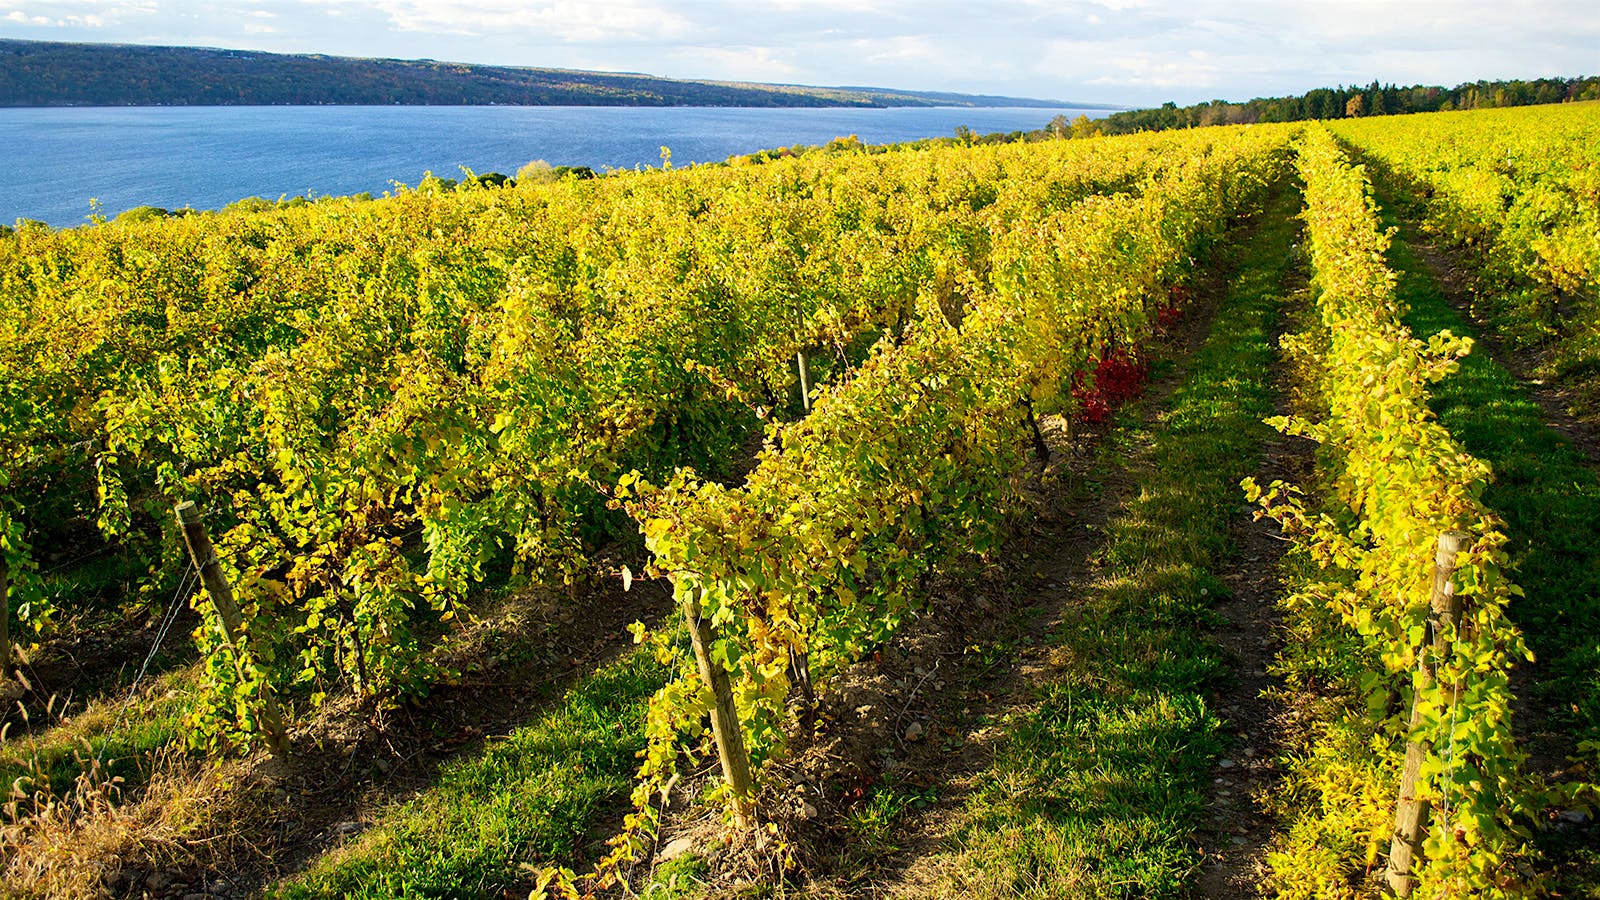 Back to New York's Finger Lakes Wine Country